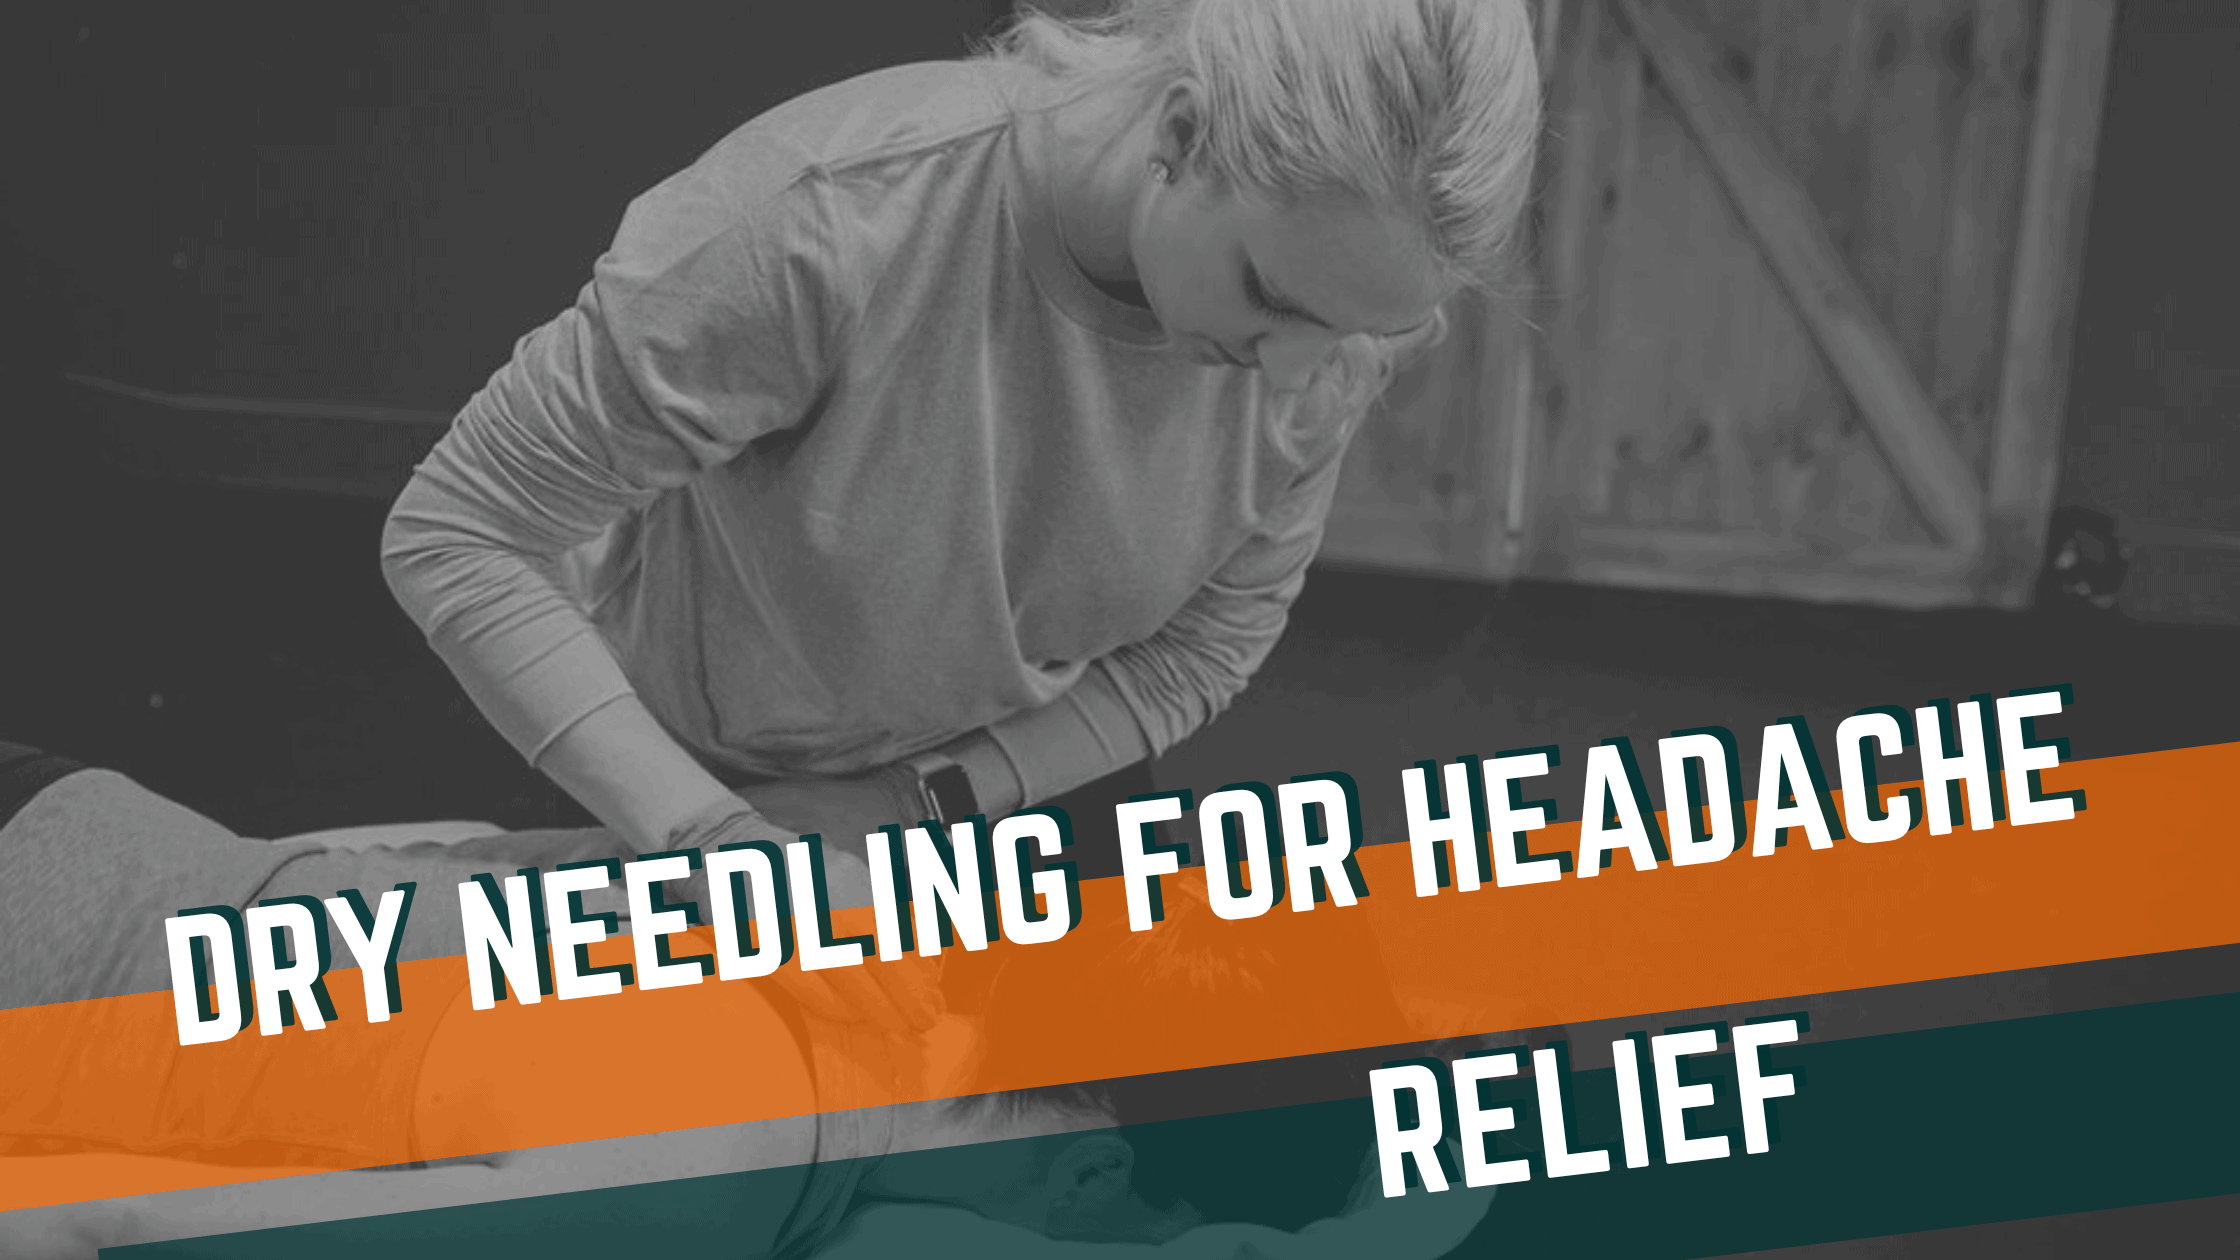 Featured image for “Dry Needling for Headache Relief”